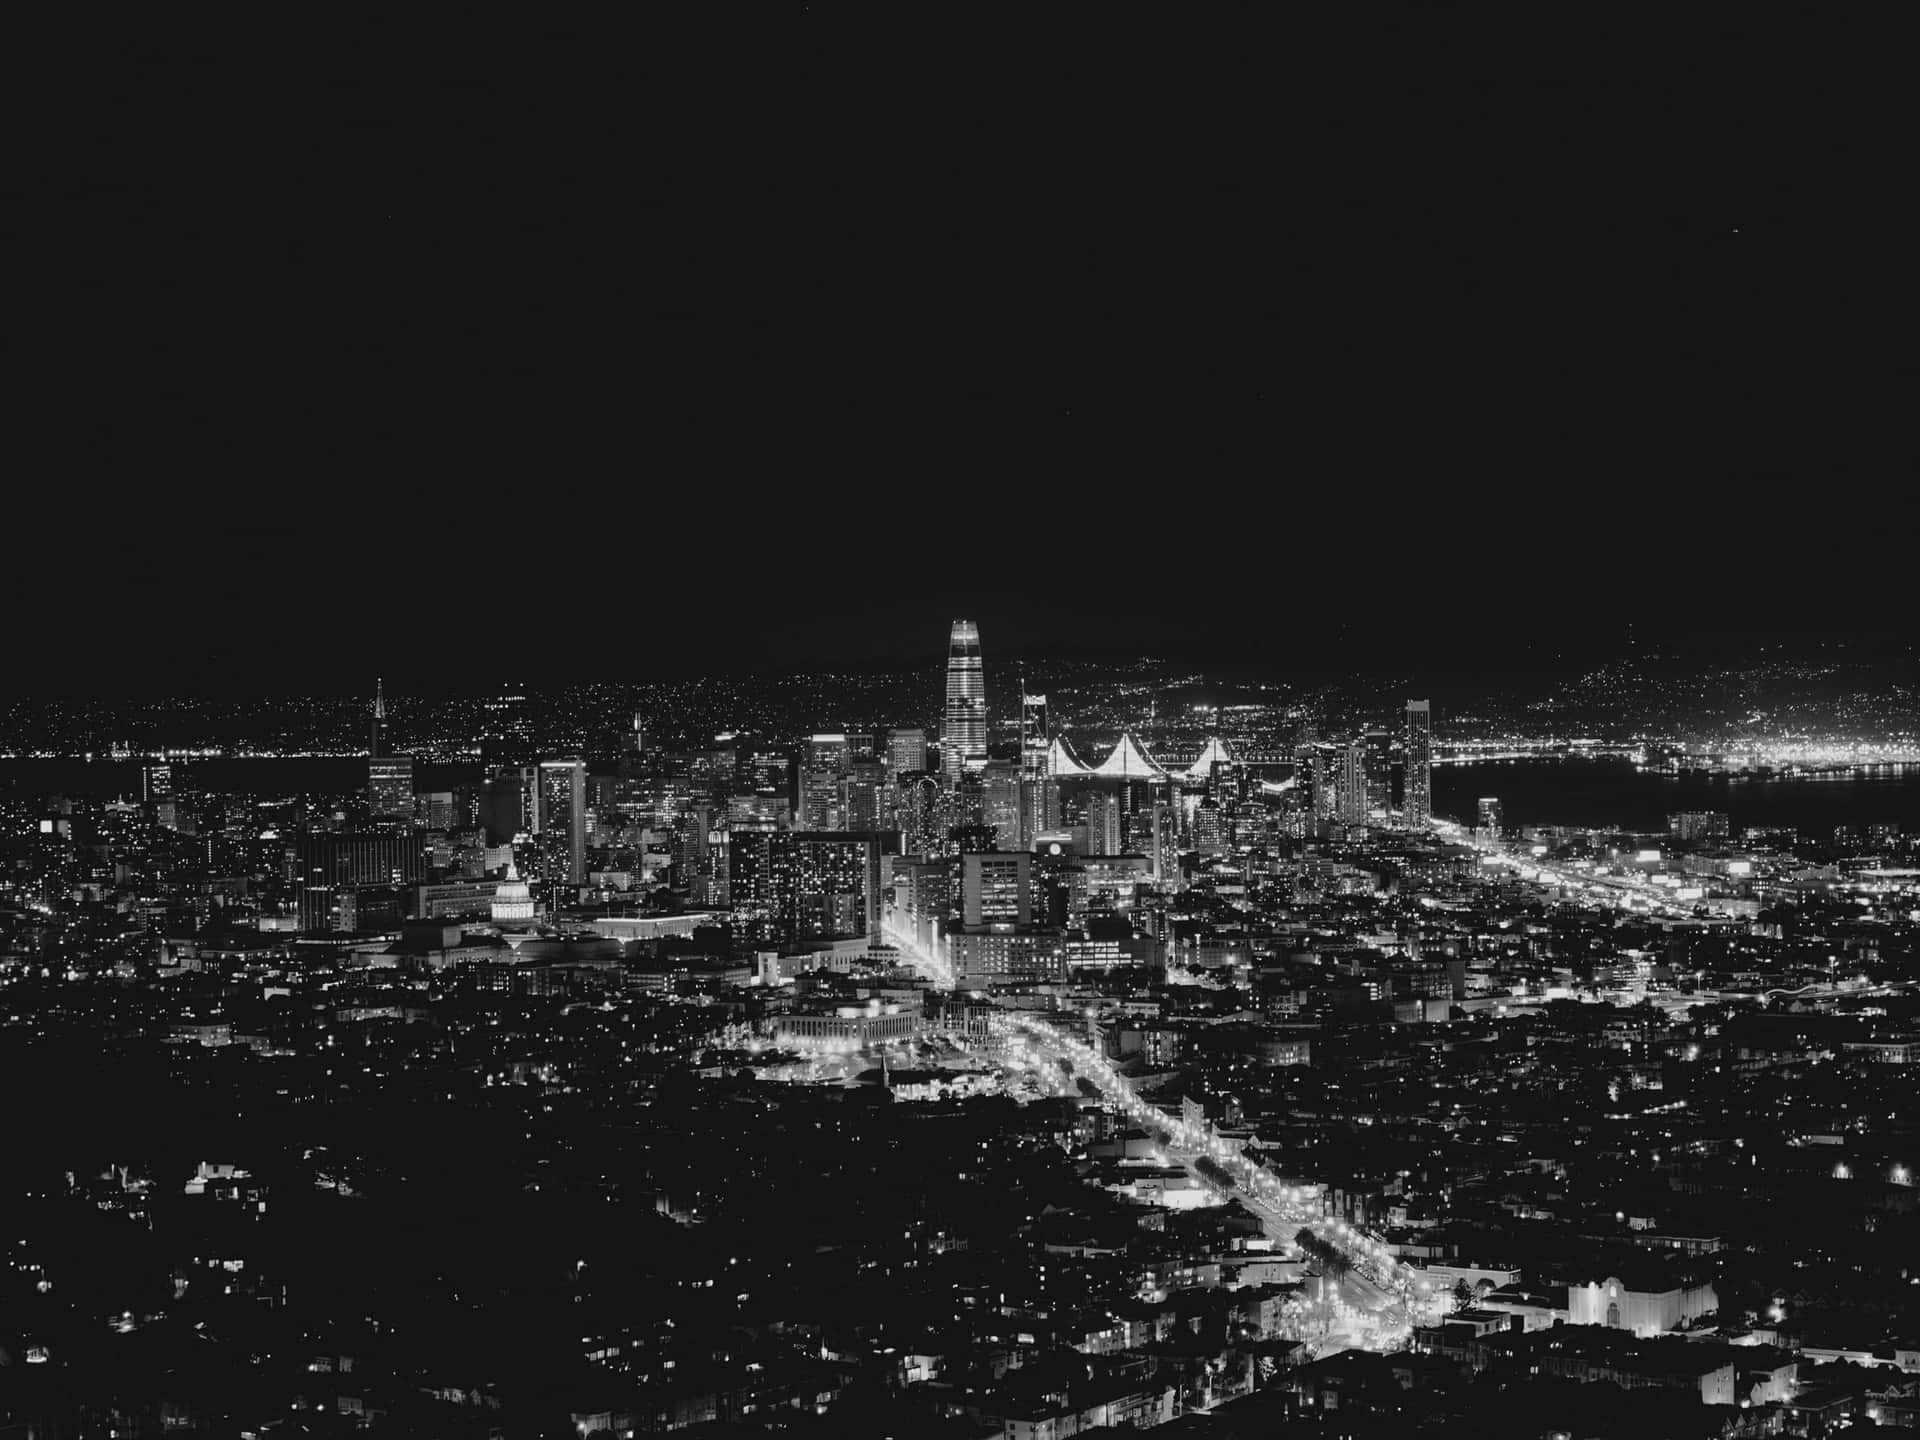 "The Iconic Golden Gate Bridge and San Francisco skyline in Black and White" Wallpaper